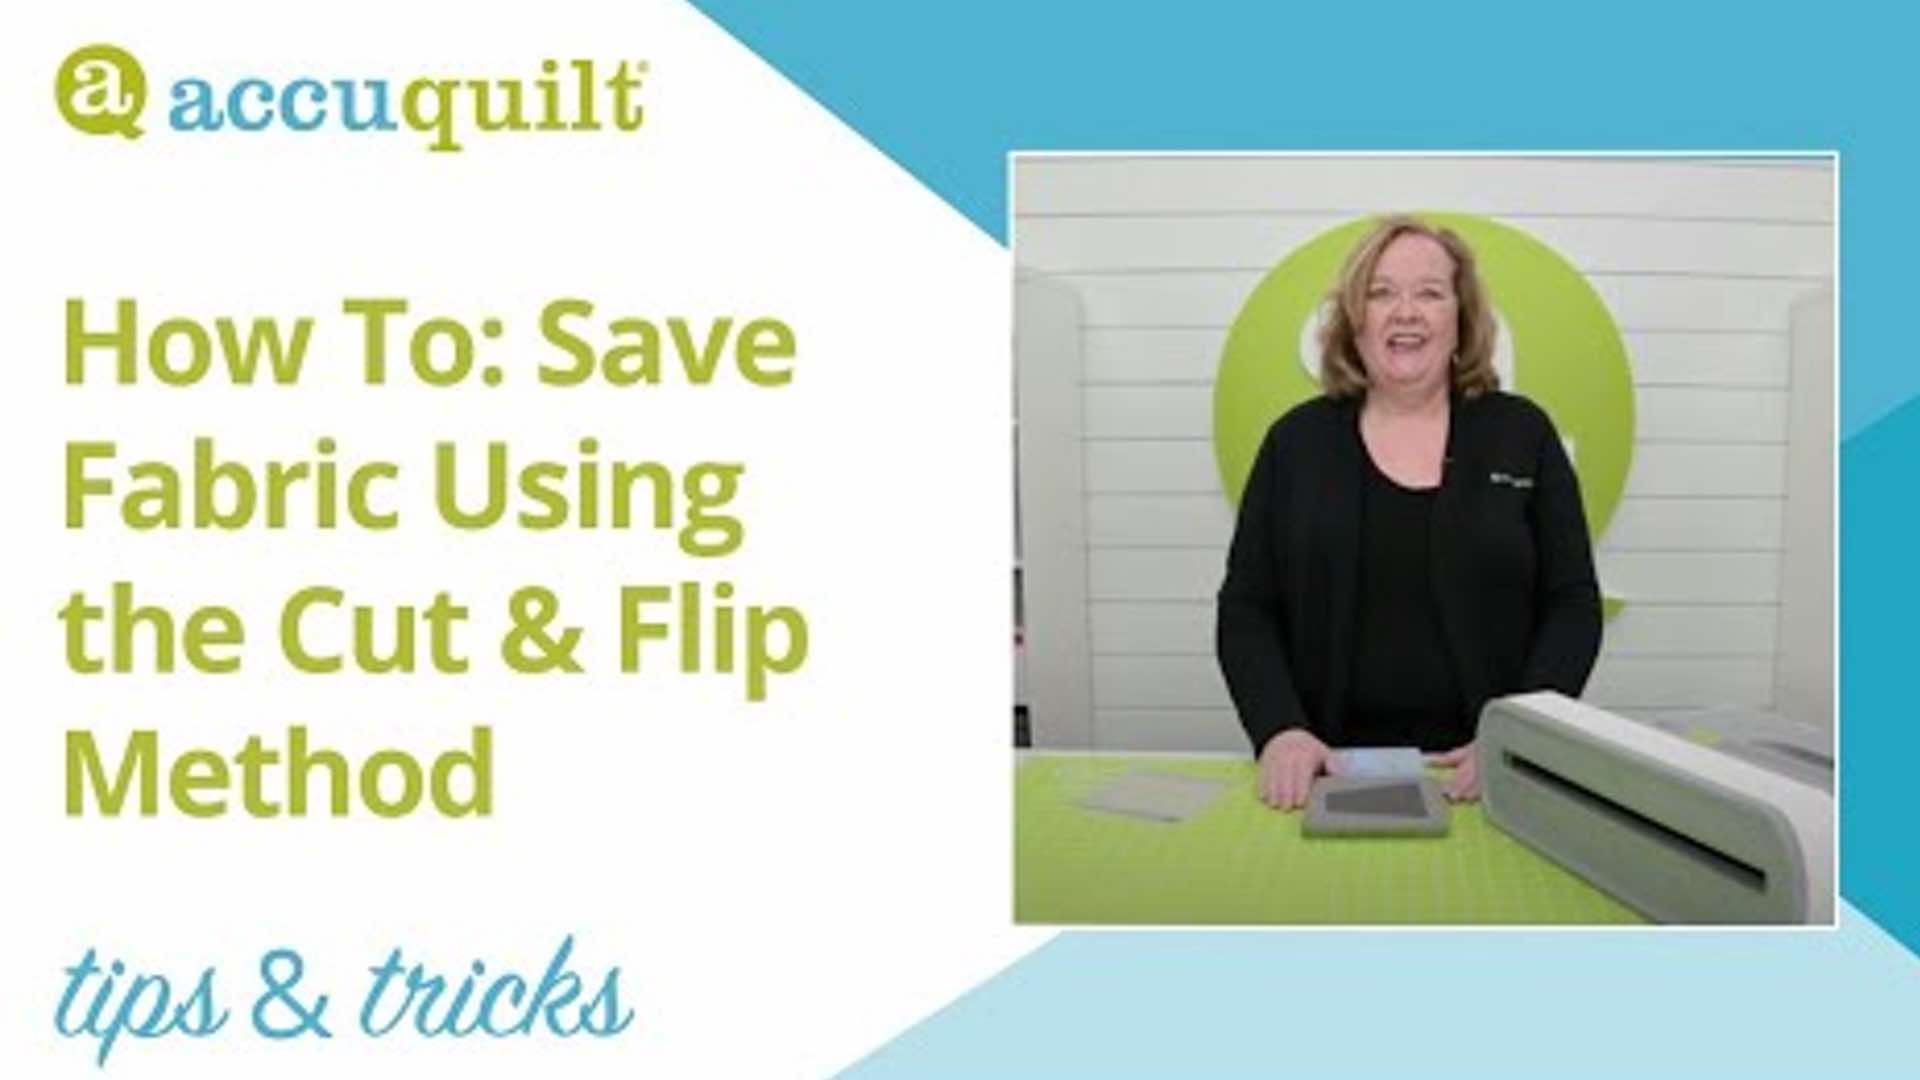 How To Save Fabric Using the Cut & Flip Method